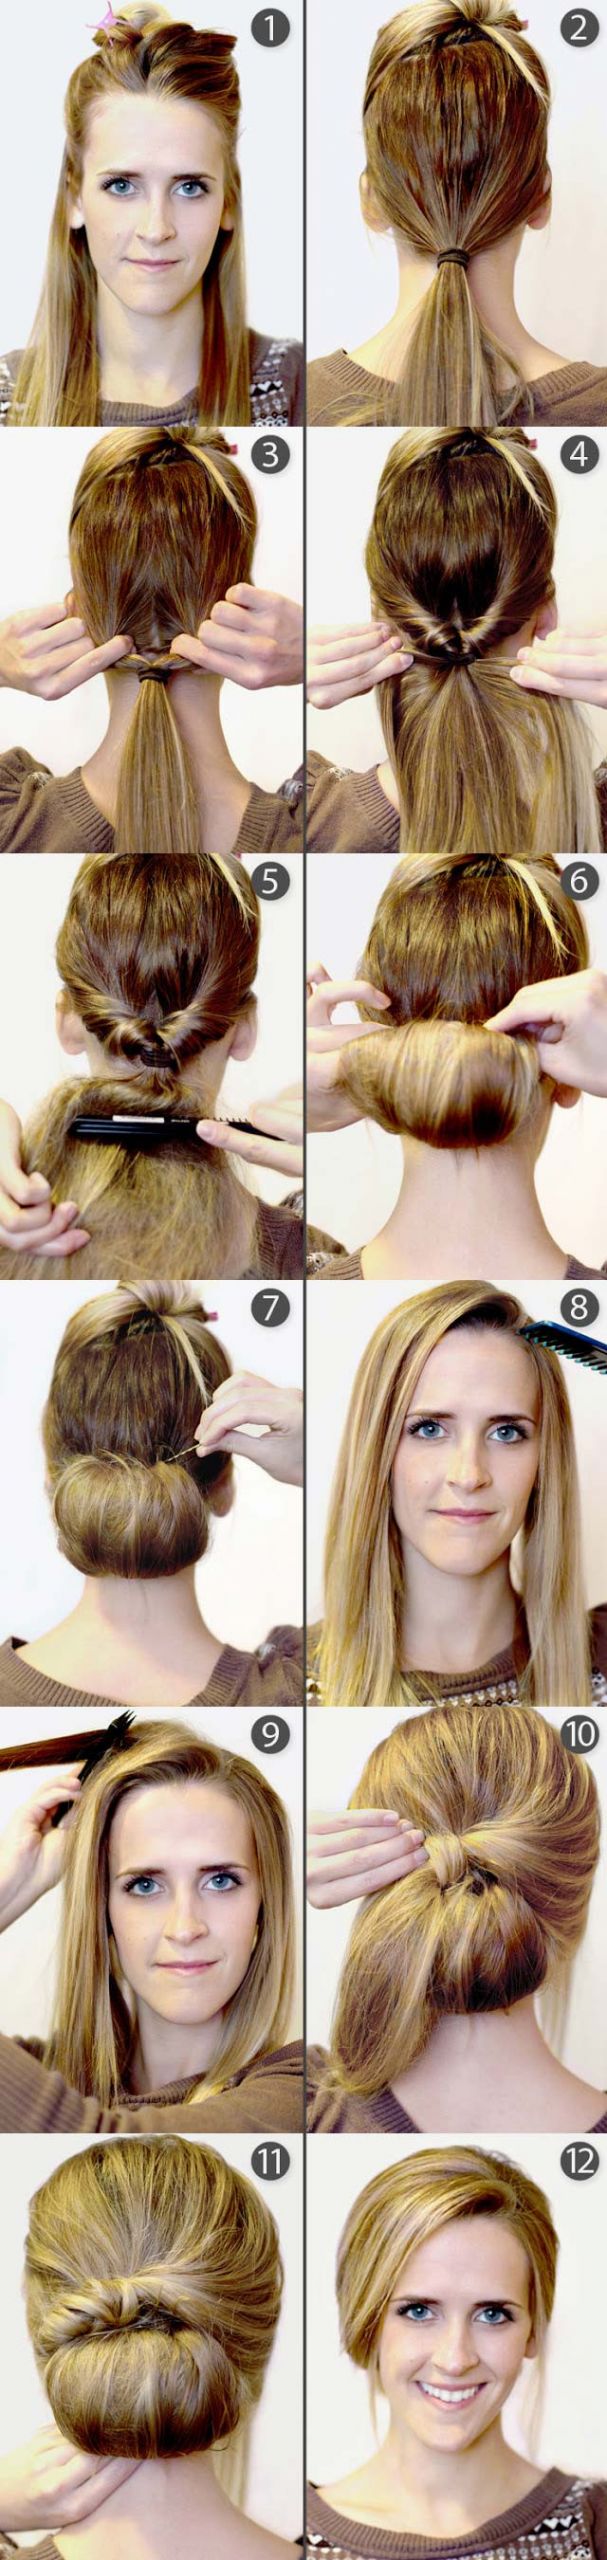 Cute Diy Hairstyles
 DIY Your Step by Step for the Best Cute Hairstyles